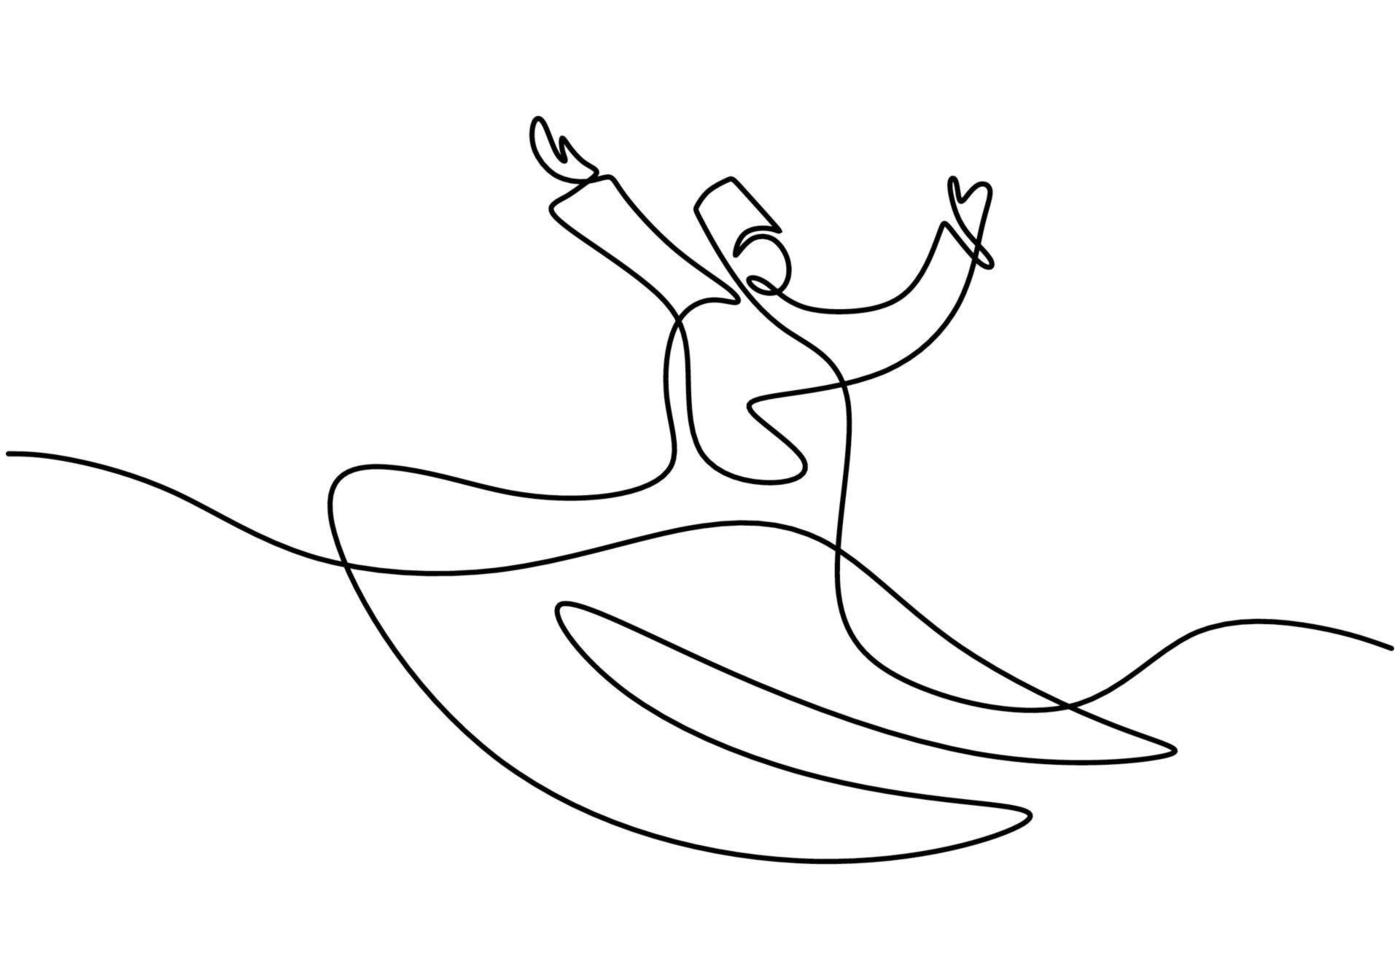 Continuous one line drawing of sufi dancer. Islamic traditional whirling dervish. Traditional Sema dancing minimalist design. One of the famous tourists attraction in Istanbul. Vector illustration